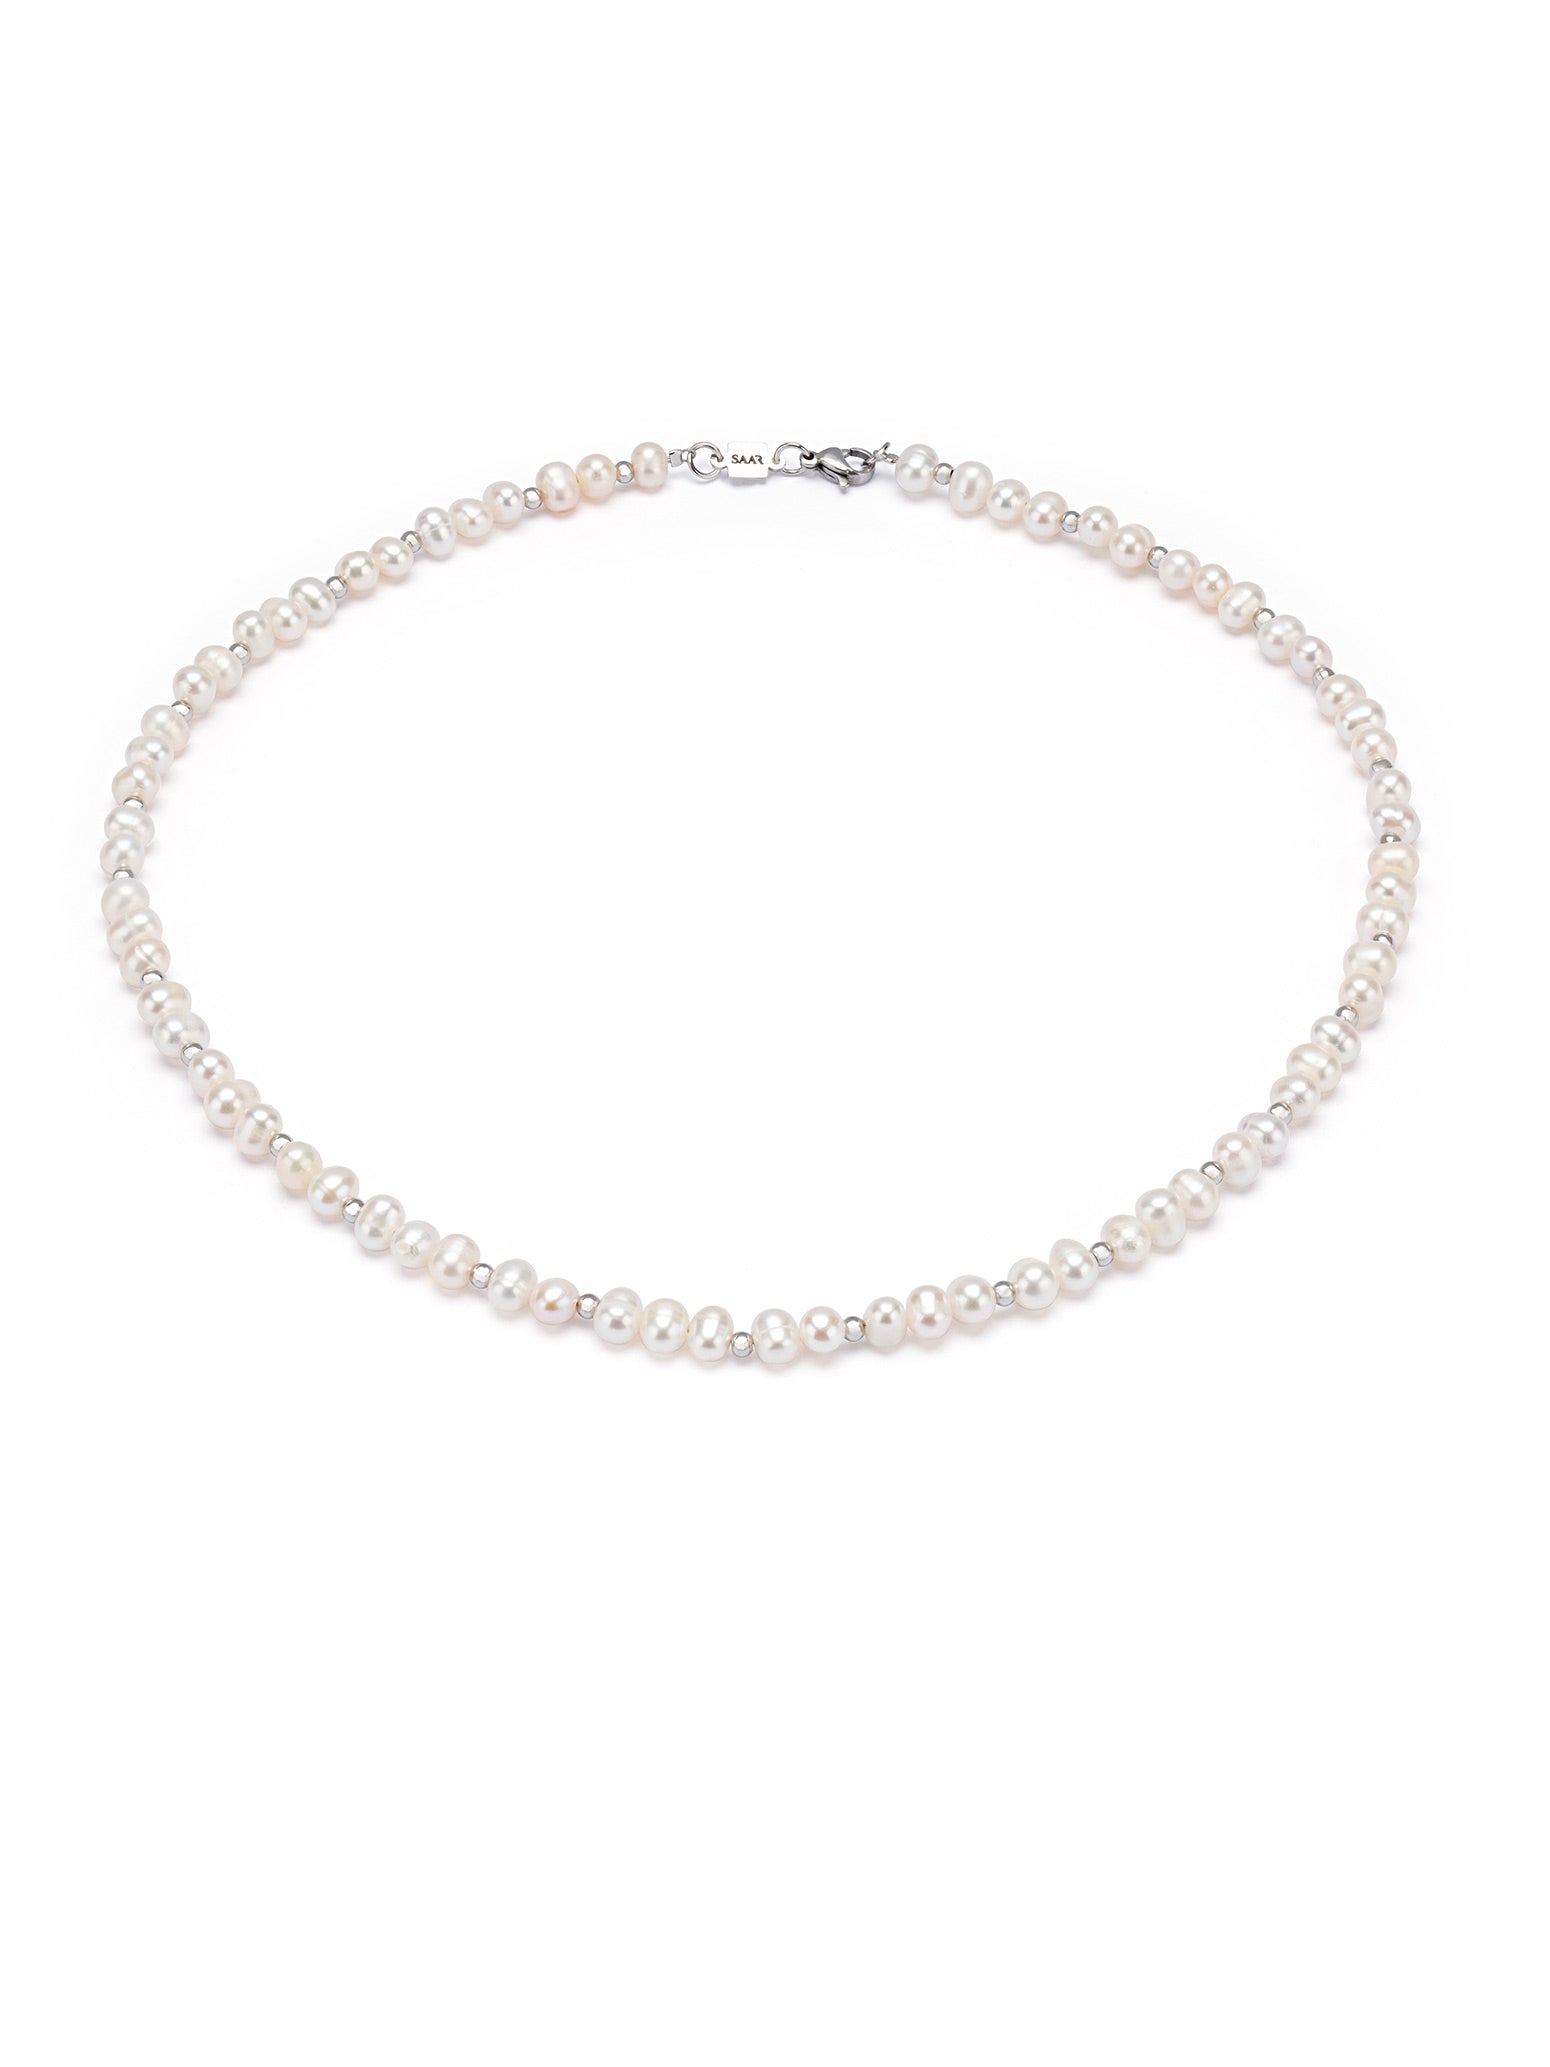 White Fresh Water Rice Pearl Necklace